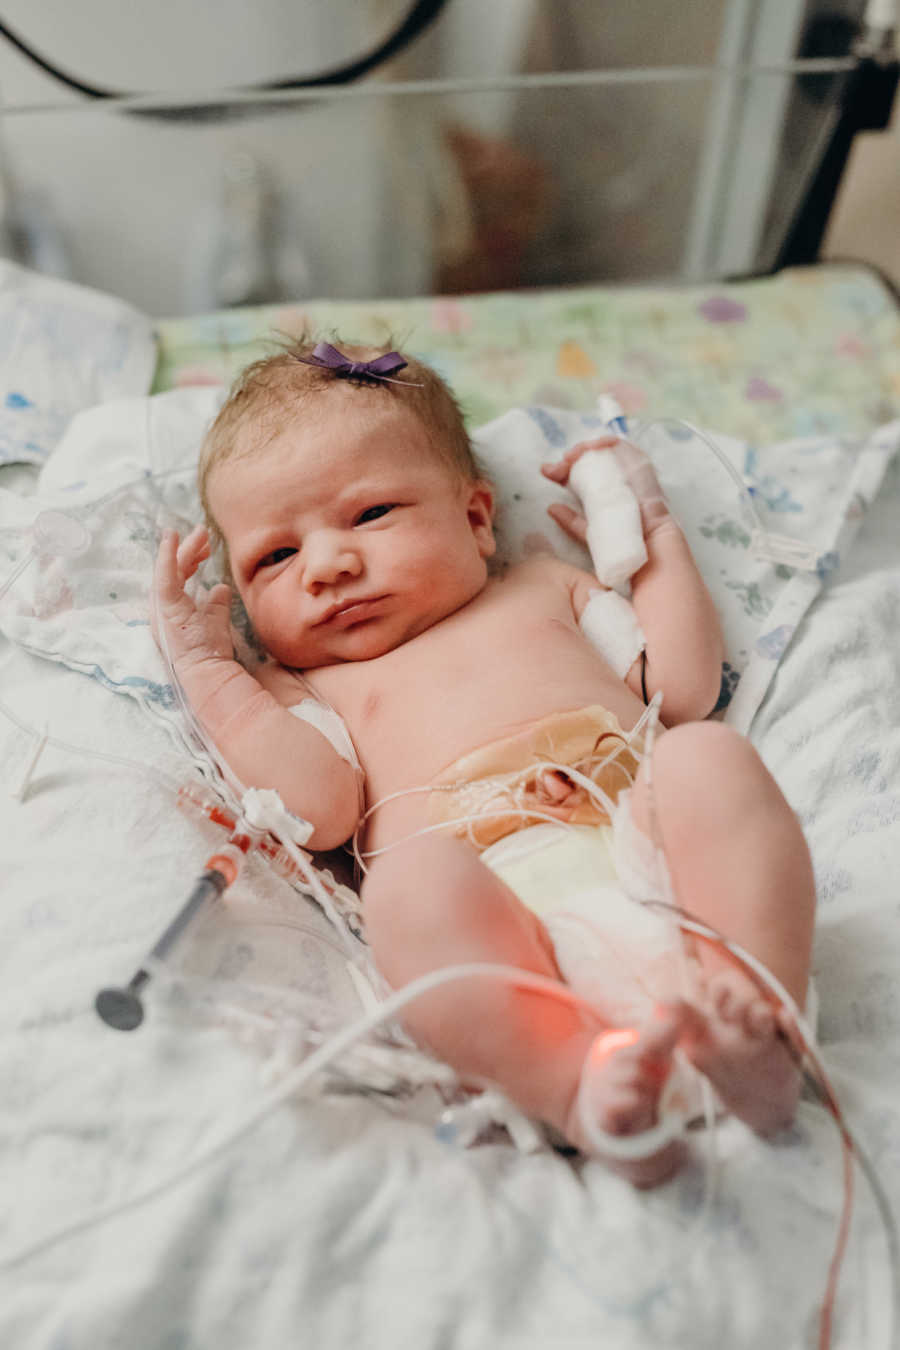 Newborn who will soon after pass away lying in hospital with wires attached to her